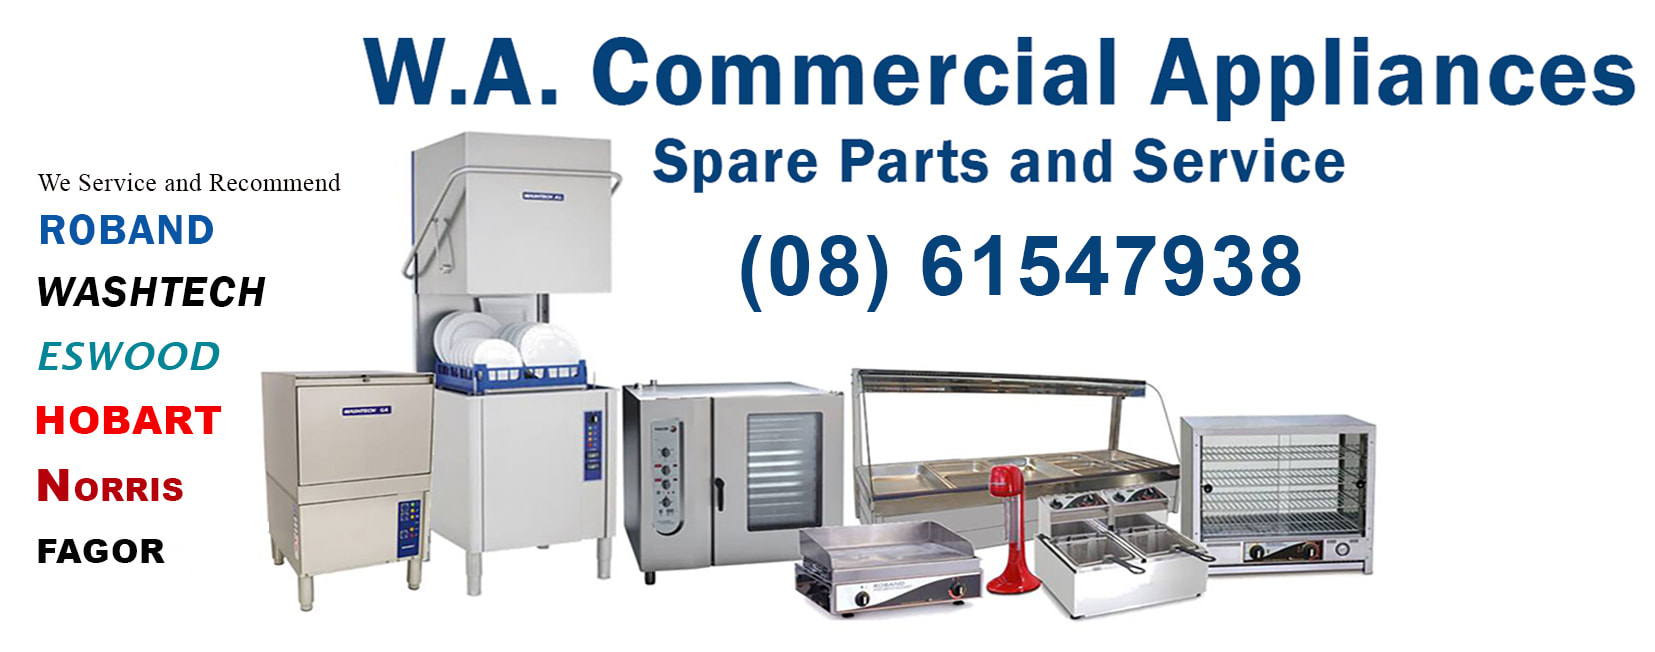 Commercial Appliance Parts and Service